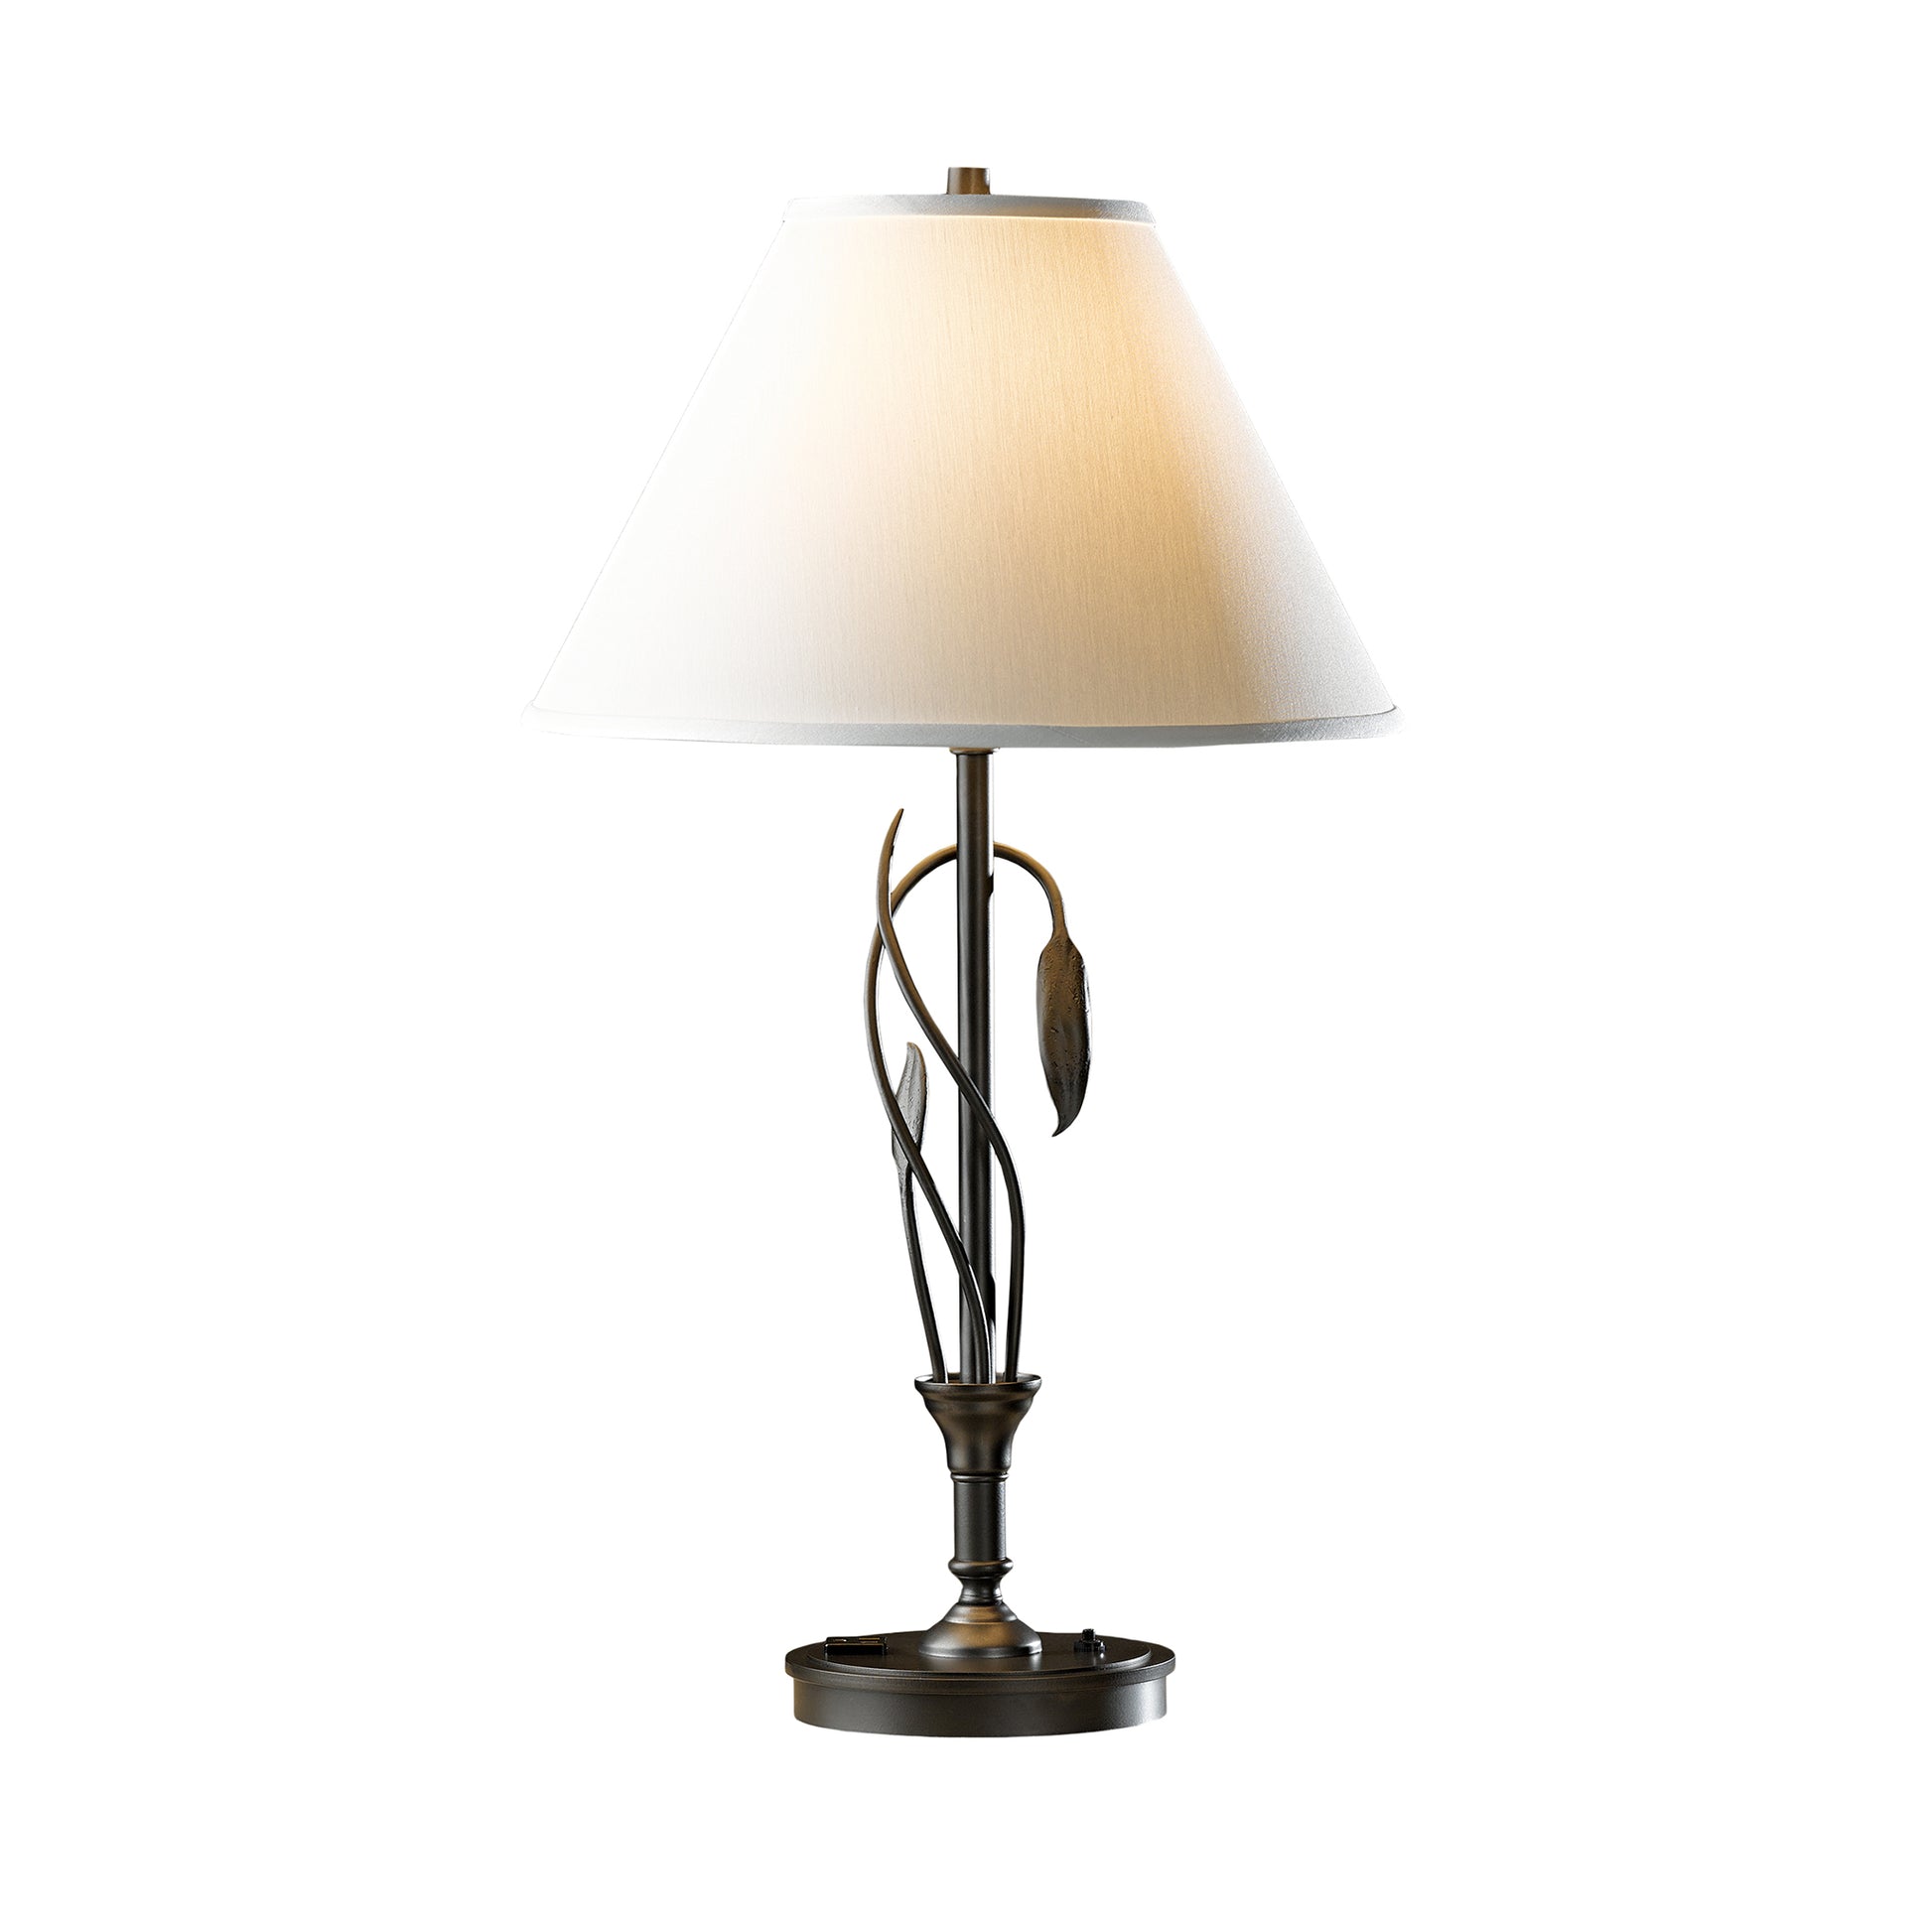 A Forged Leaves and Vase Table Lamp by Hubbardton Forge with a hand-crafted bronze base featuring leaf motifs and twisted stems, supporting a white conical lampshade, illuminated against a white background.